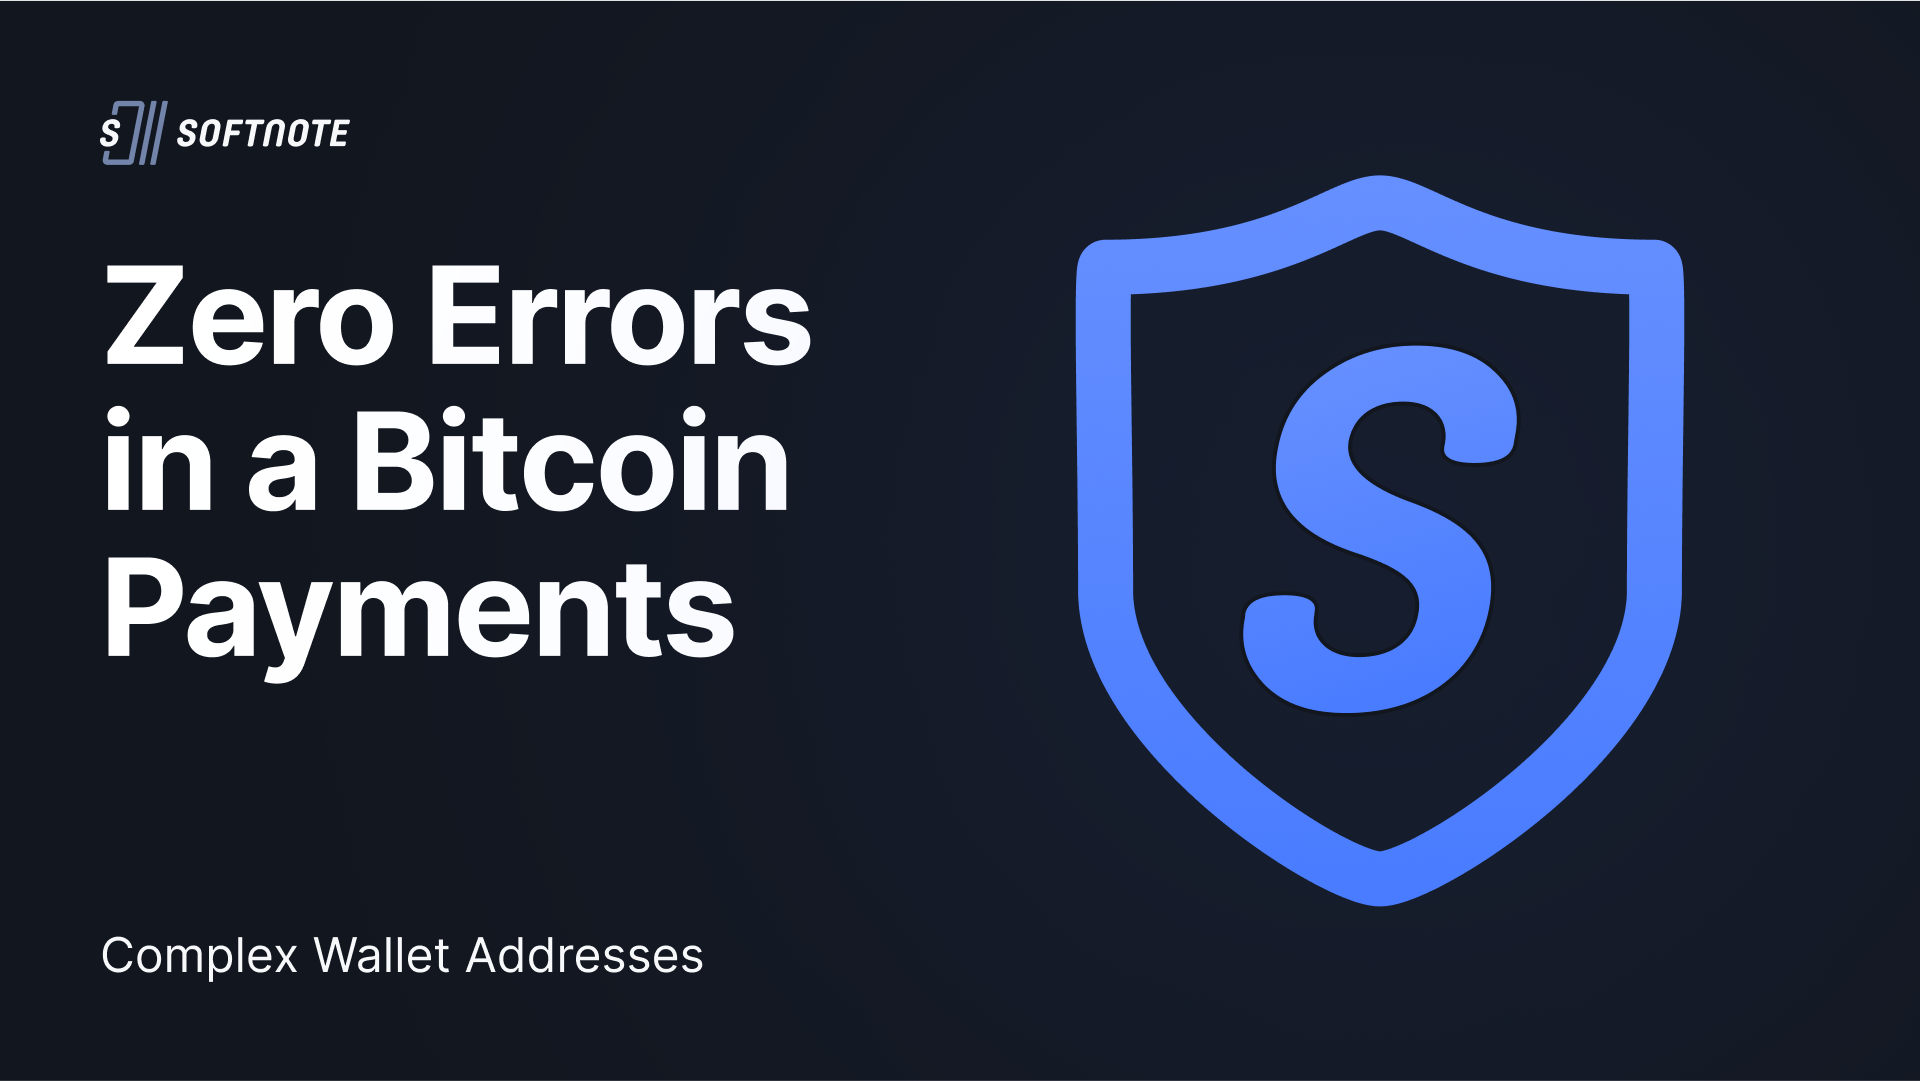 Zero Errors in a Bitcoin Payments